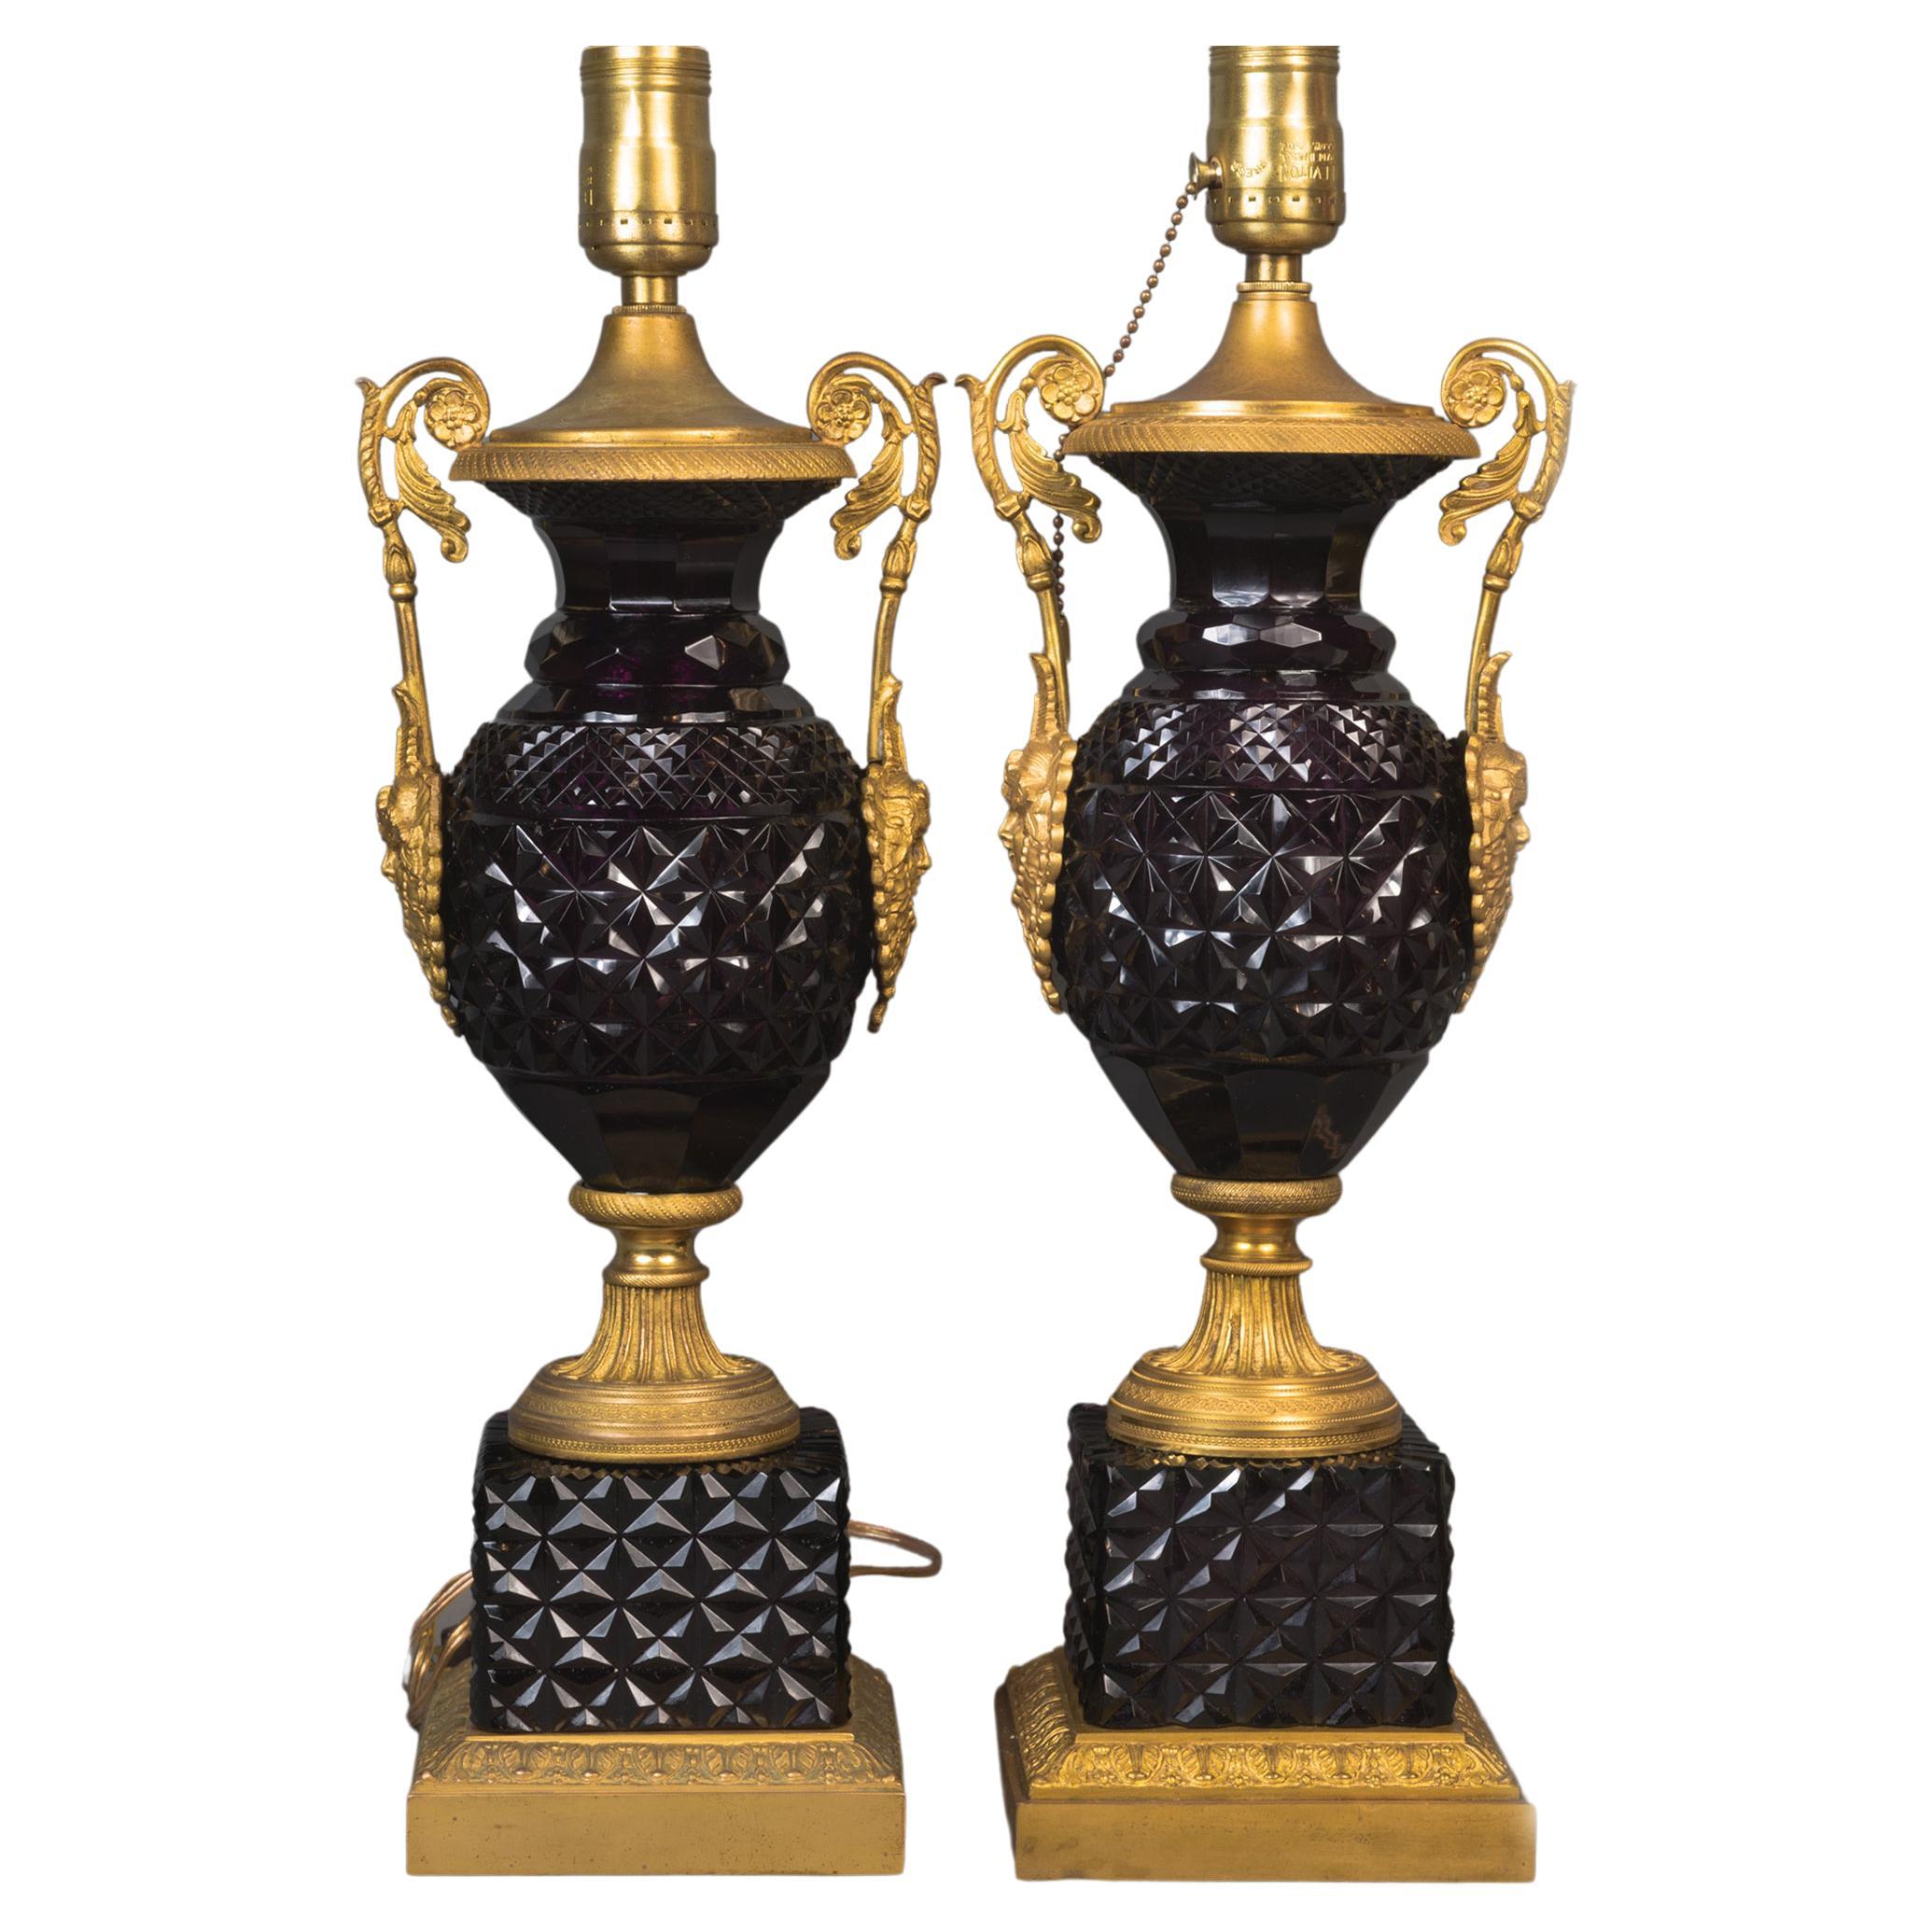 Pair of Unique of Austrian Amethyst Lamps with Gilt Bronze Hardware